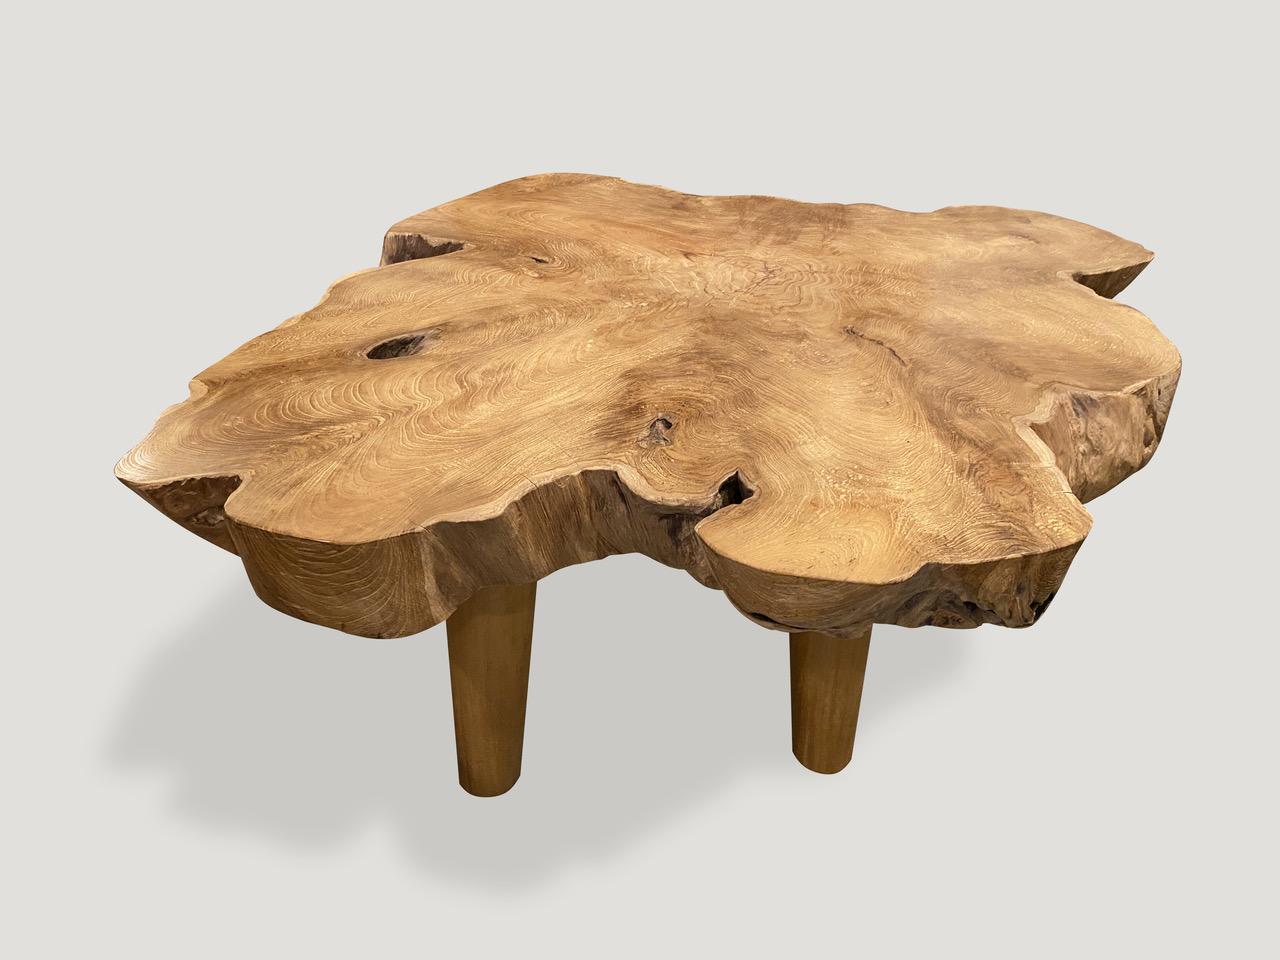 Impressive three inch single slab live edge teak wood coffee table set on minimalist mid century style legs. Finished with a natural oil revealing the beautiful wood grain. We have a collection. The price and images reflect the one shown.

Own an